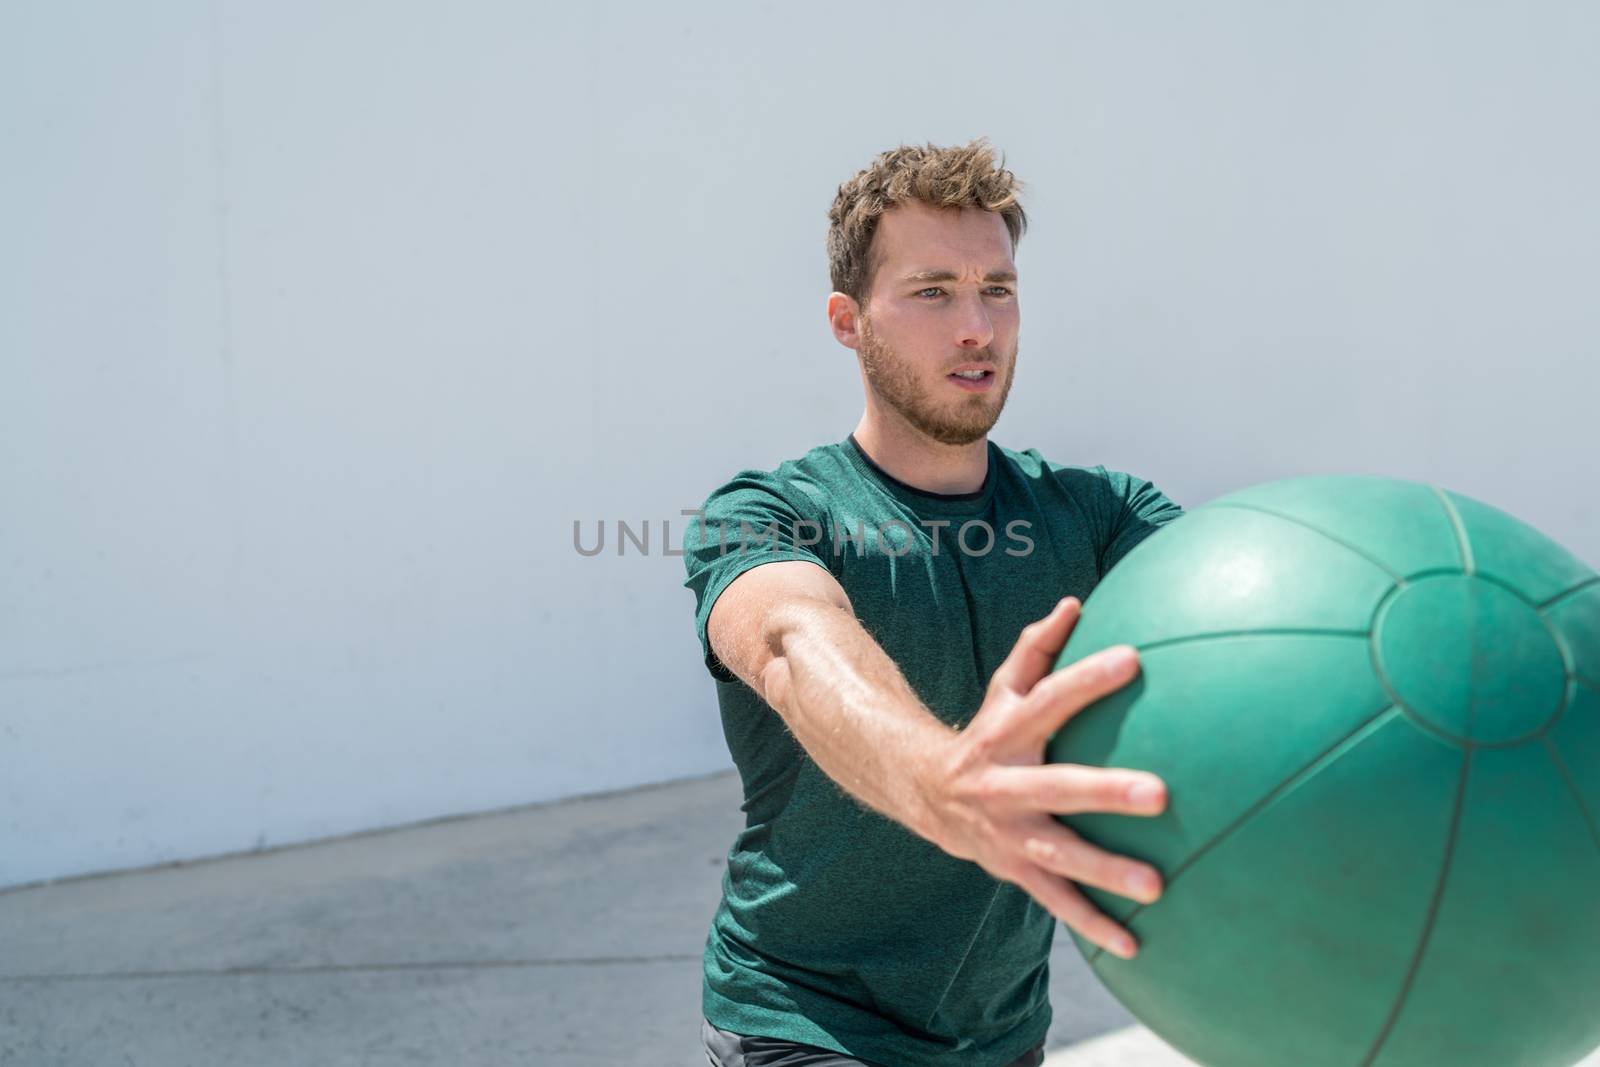 Medicine ball workout fitness man strength training arms doing deltoid front raise exercise for shoulder muscles at gym. Upper body workout with weight ball at fitness centre.